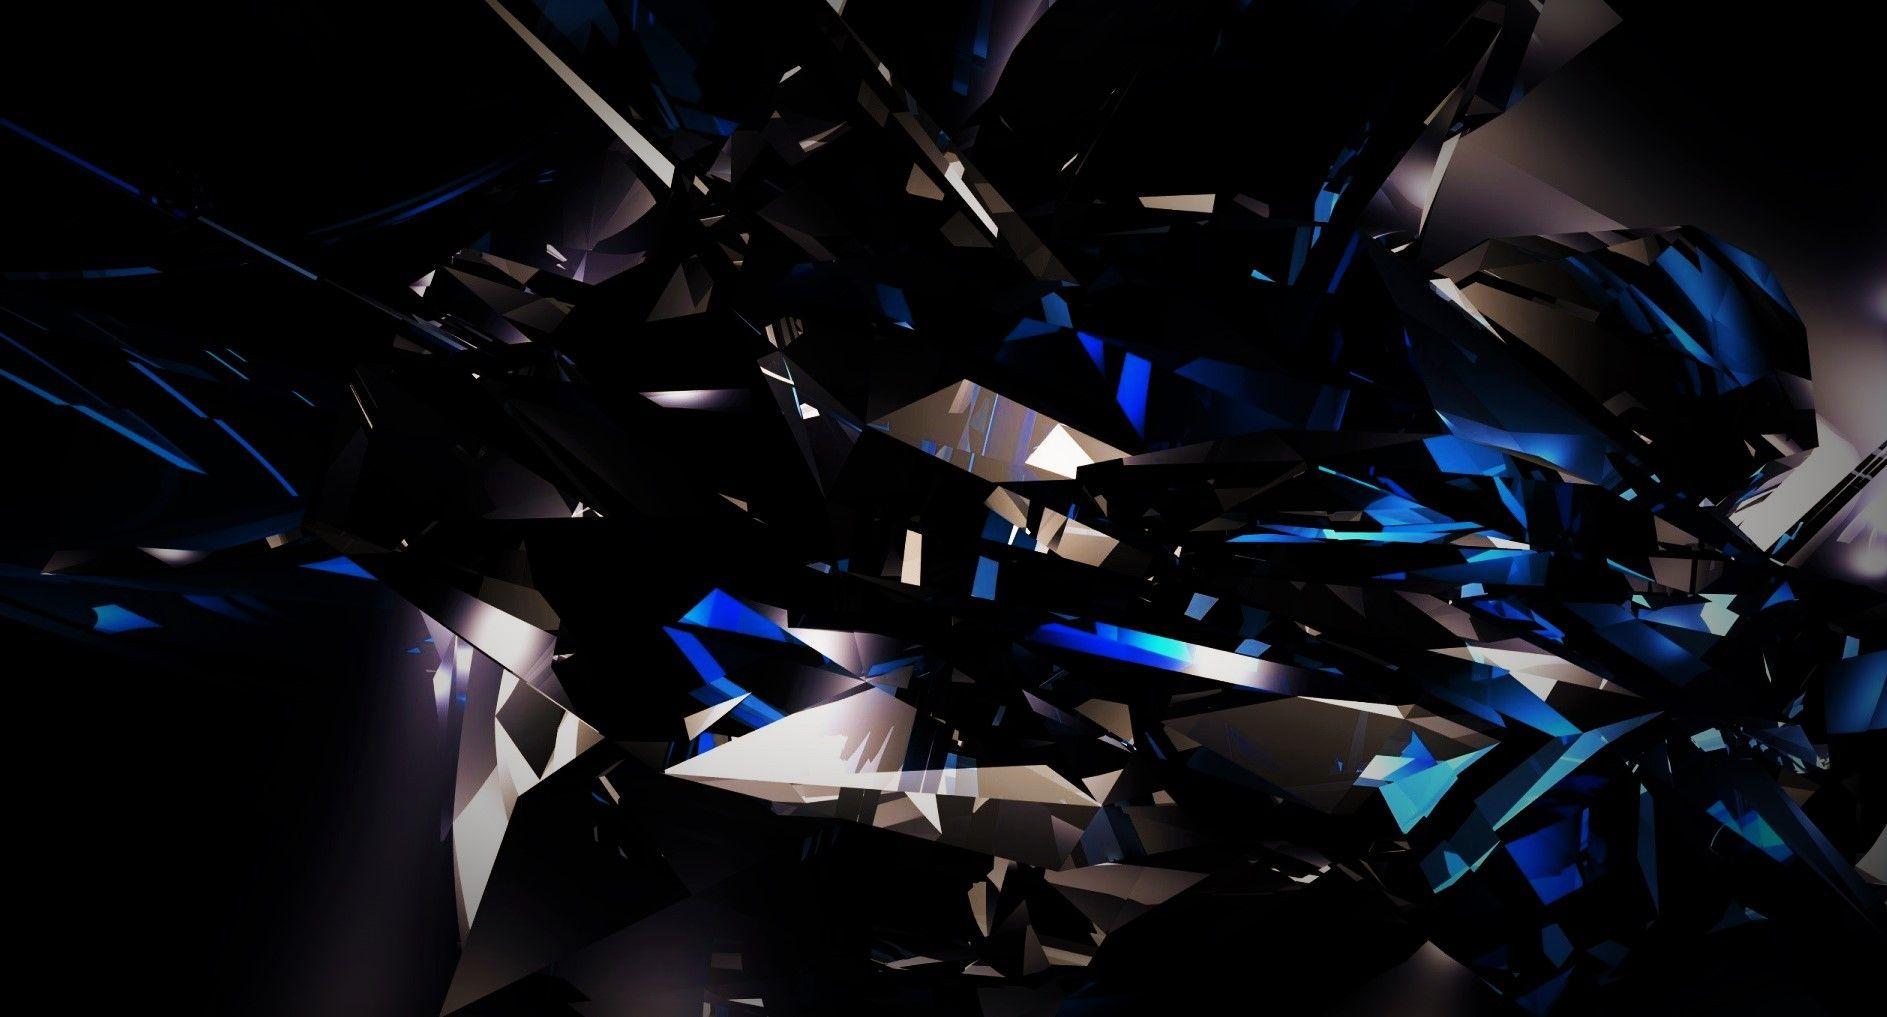 black, Dark, Abstract, 3D, Shards, Glass, Blue, Bright Wallpapers